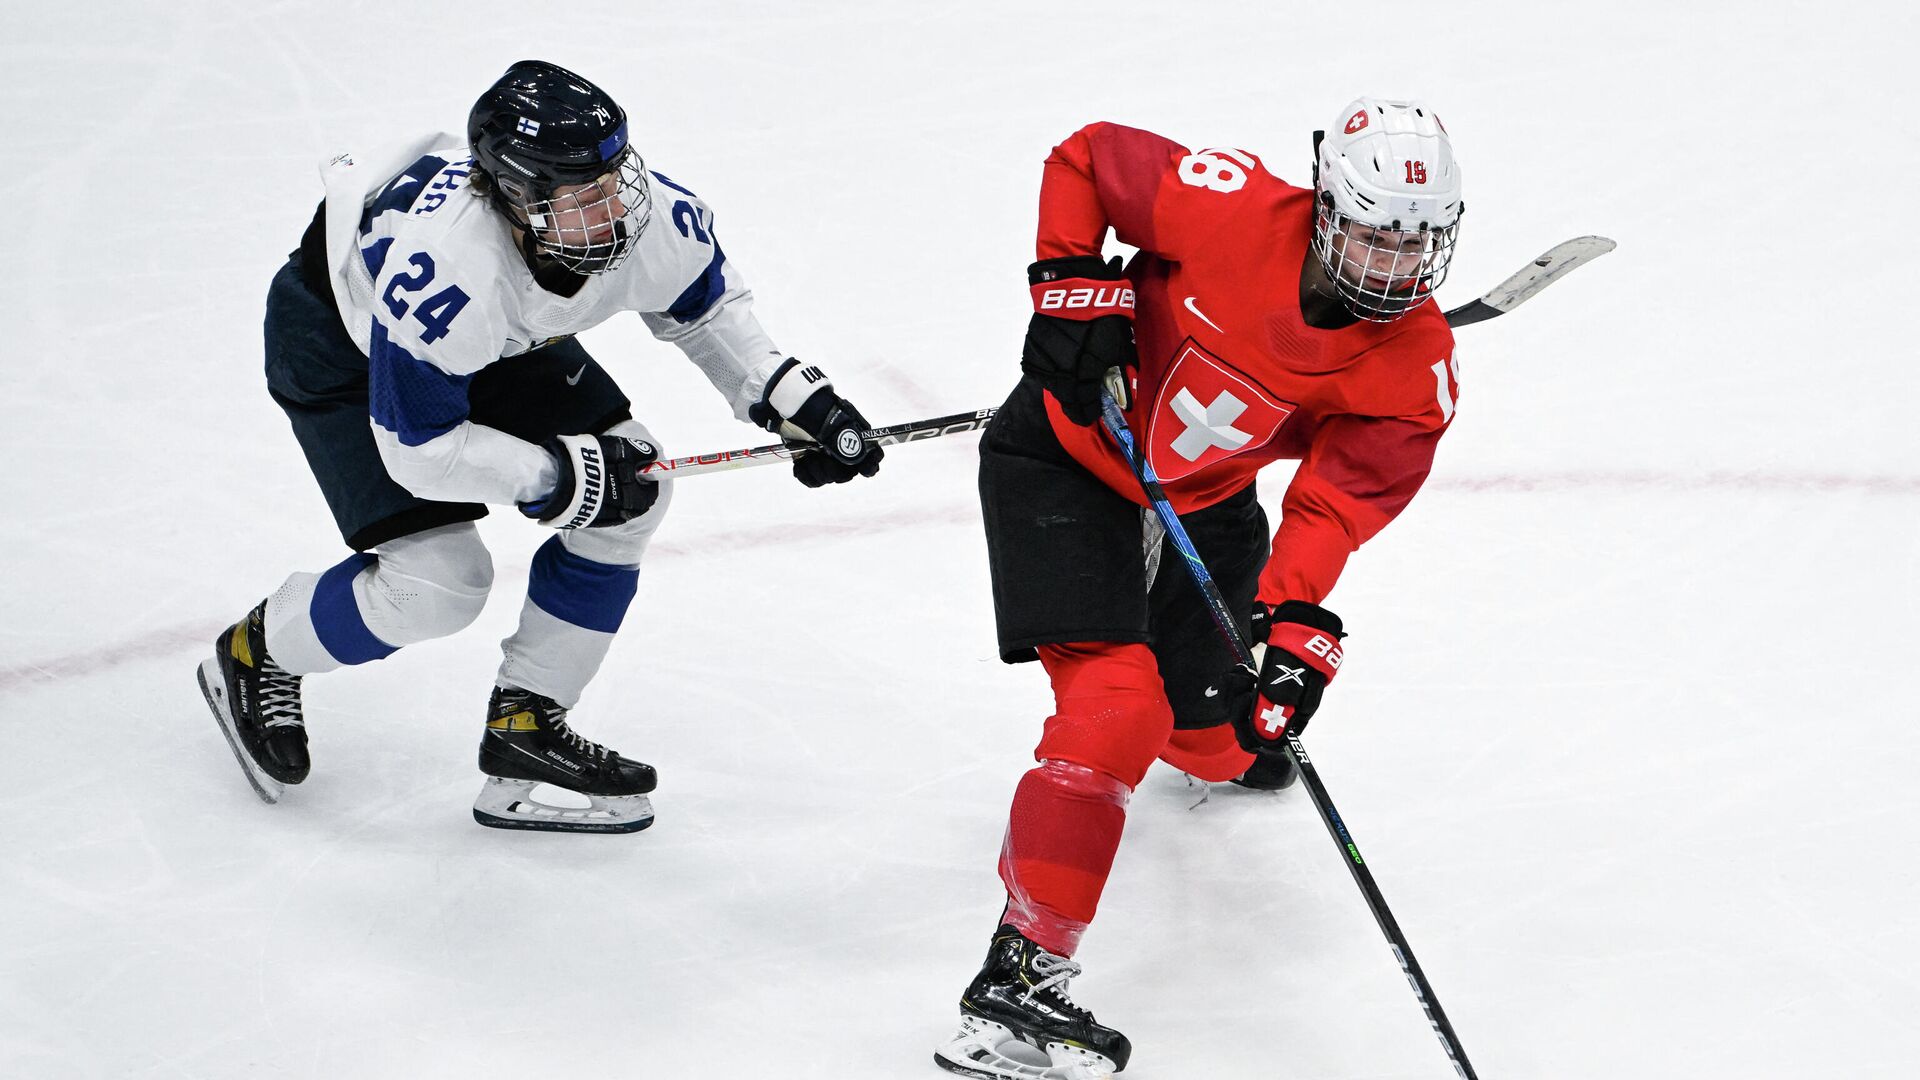 Finland's Viivi Vainikka (L) fights for the puck with Switzerland's Stefanie Wetli during the women's preliminary round group A match of the Beijing 2022 Winter Olympic Games ice hockey competition between Switzerland and Finland, at the National Indoor Stadium in Beijing on February 7, 2022. (Photo by GABRIEL BOUYS / AFP) - РИА Новости, 1920, 07.02.2022